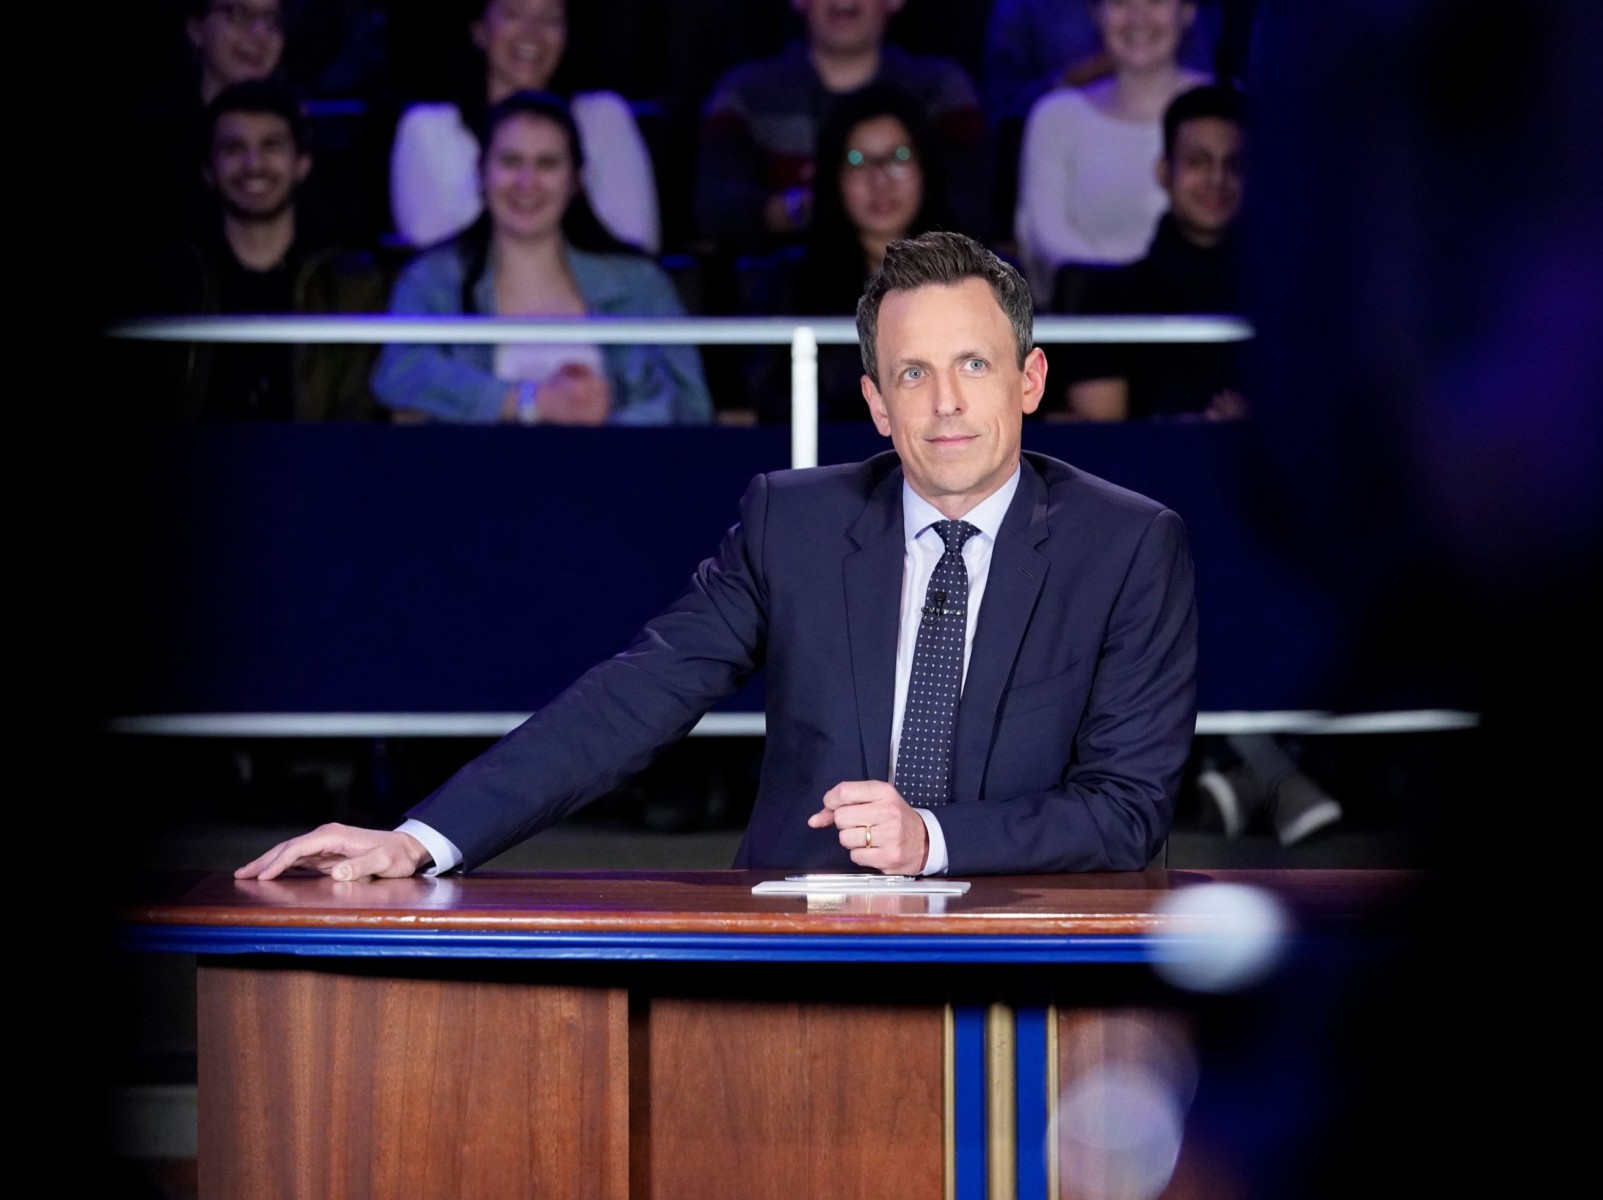  Late Night With Seth Meyers has been halted until further notice